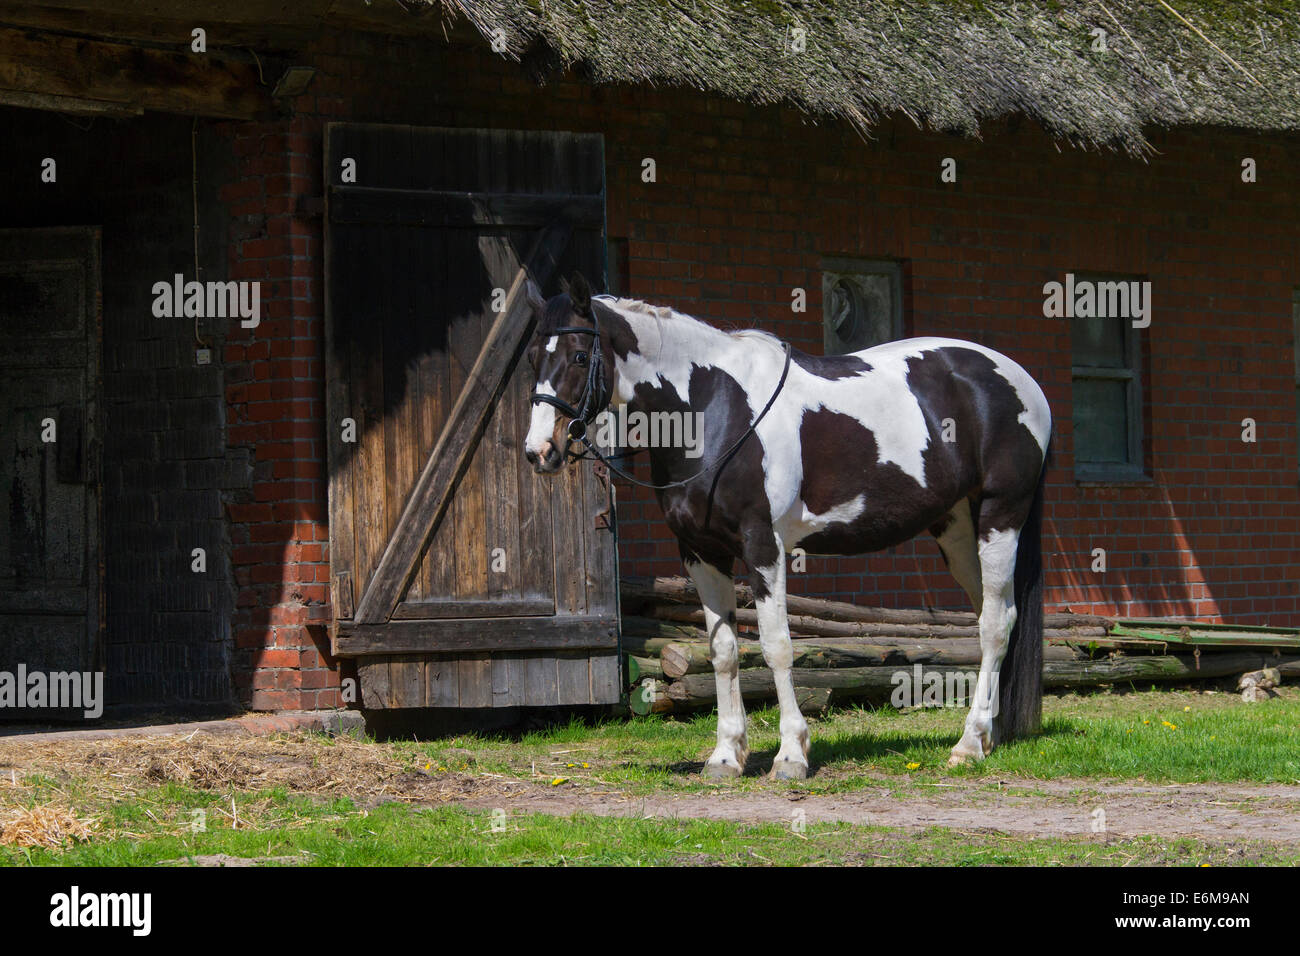 American Indian horse (Equus ferus caballus) Pinto horse with Tobiano spotted color pattern in front of stable at manege Stock Photo